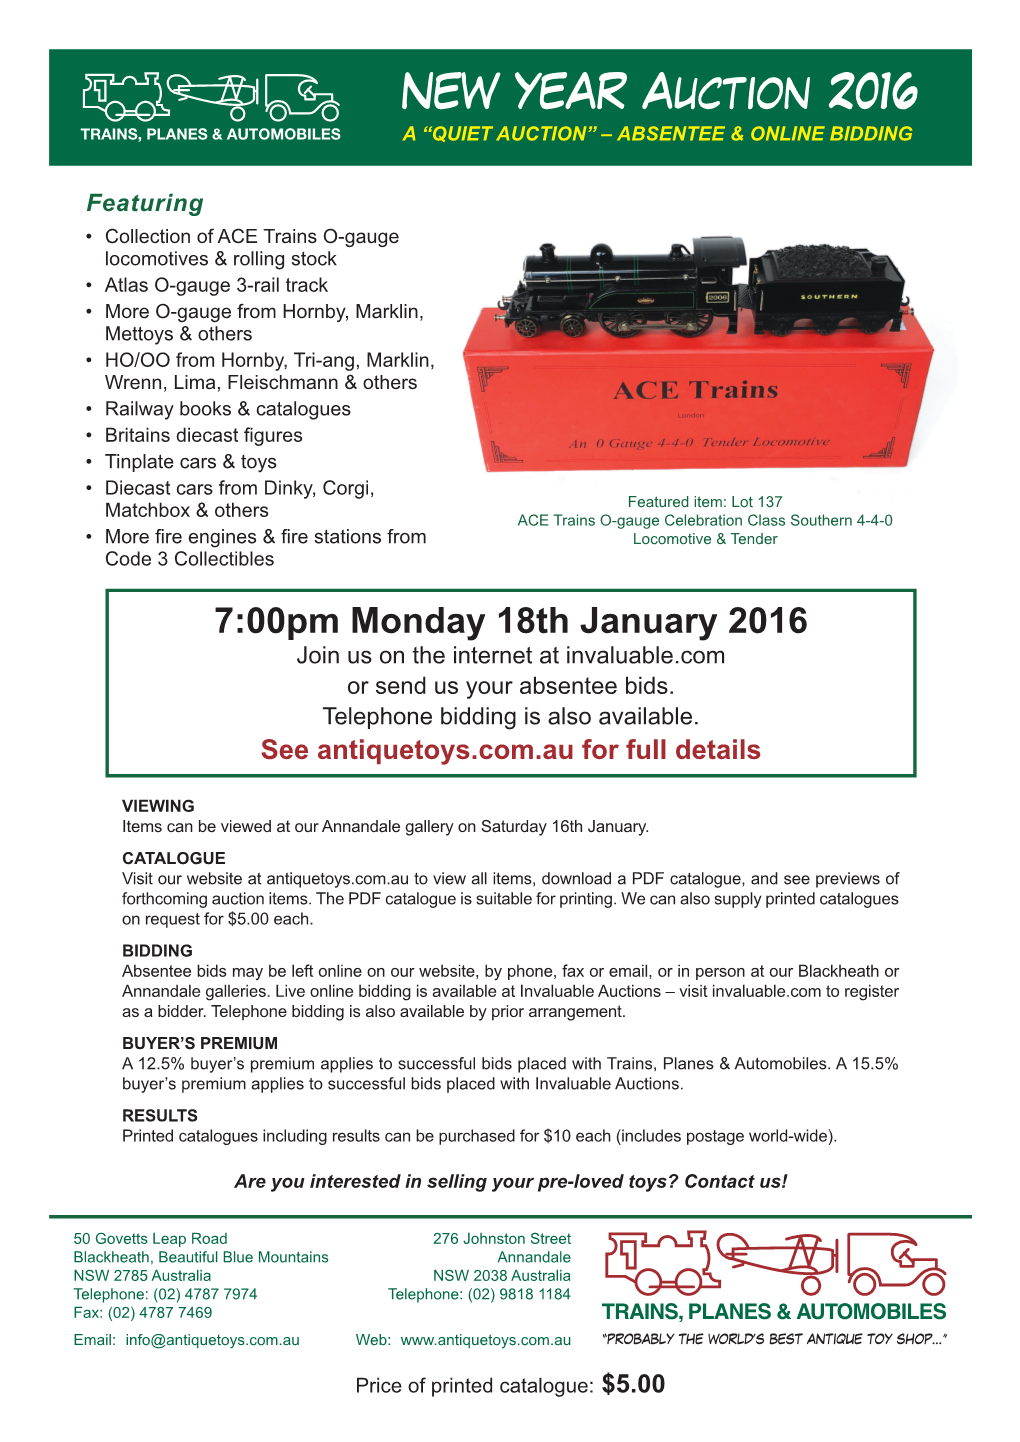 New Year Auction 2016 Catalogue